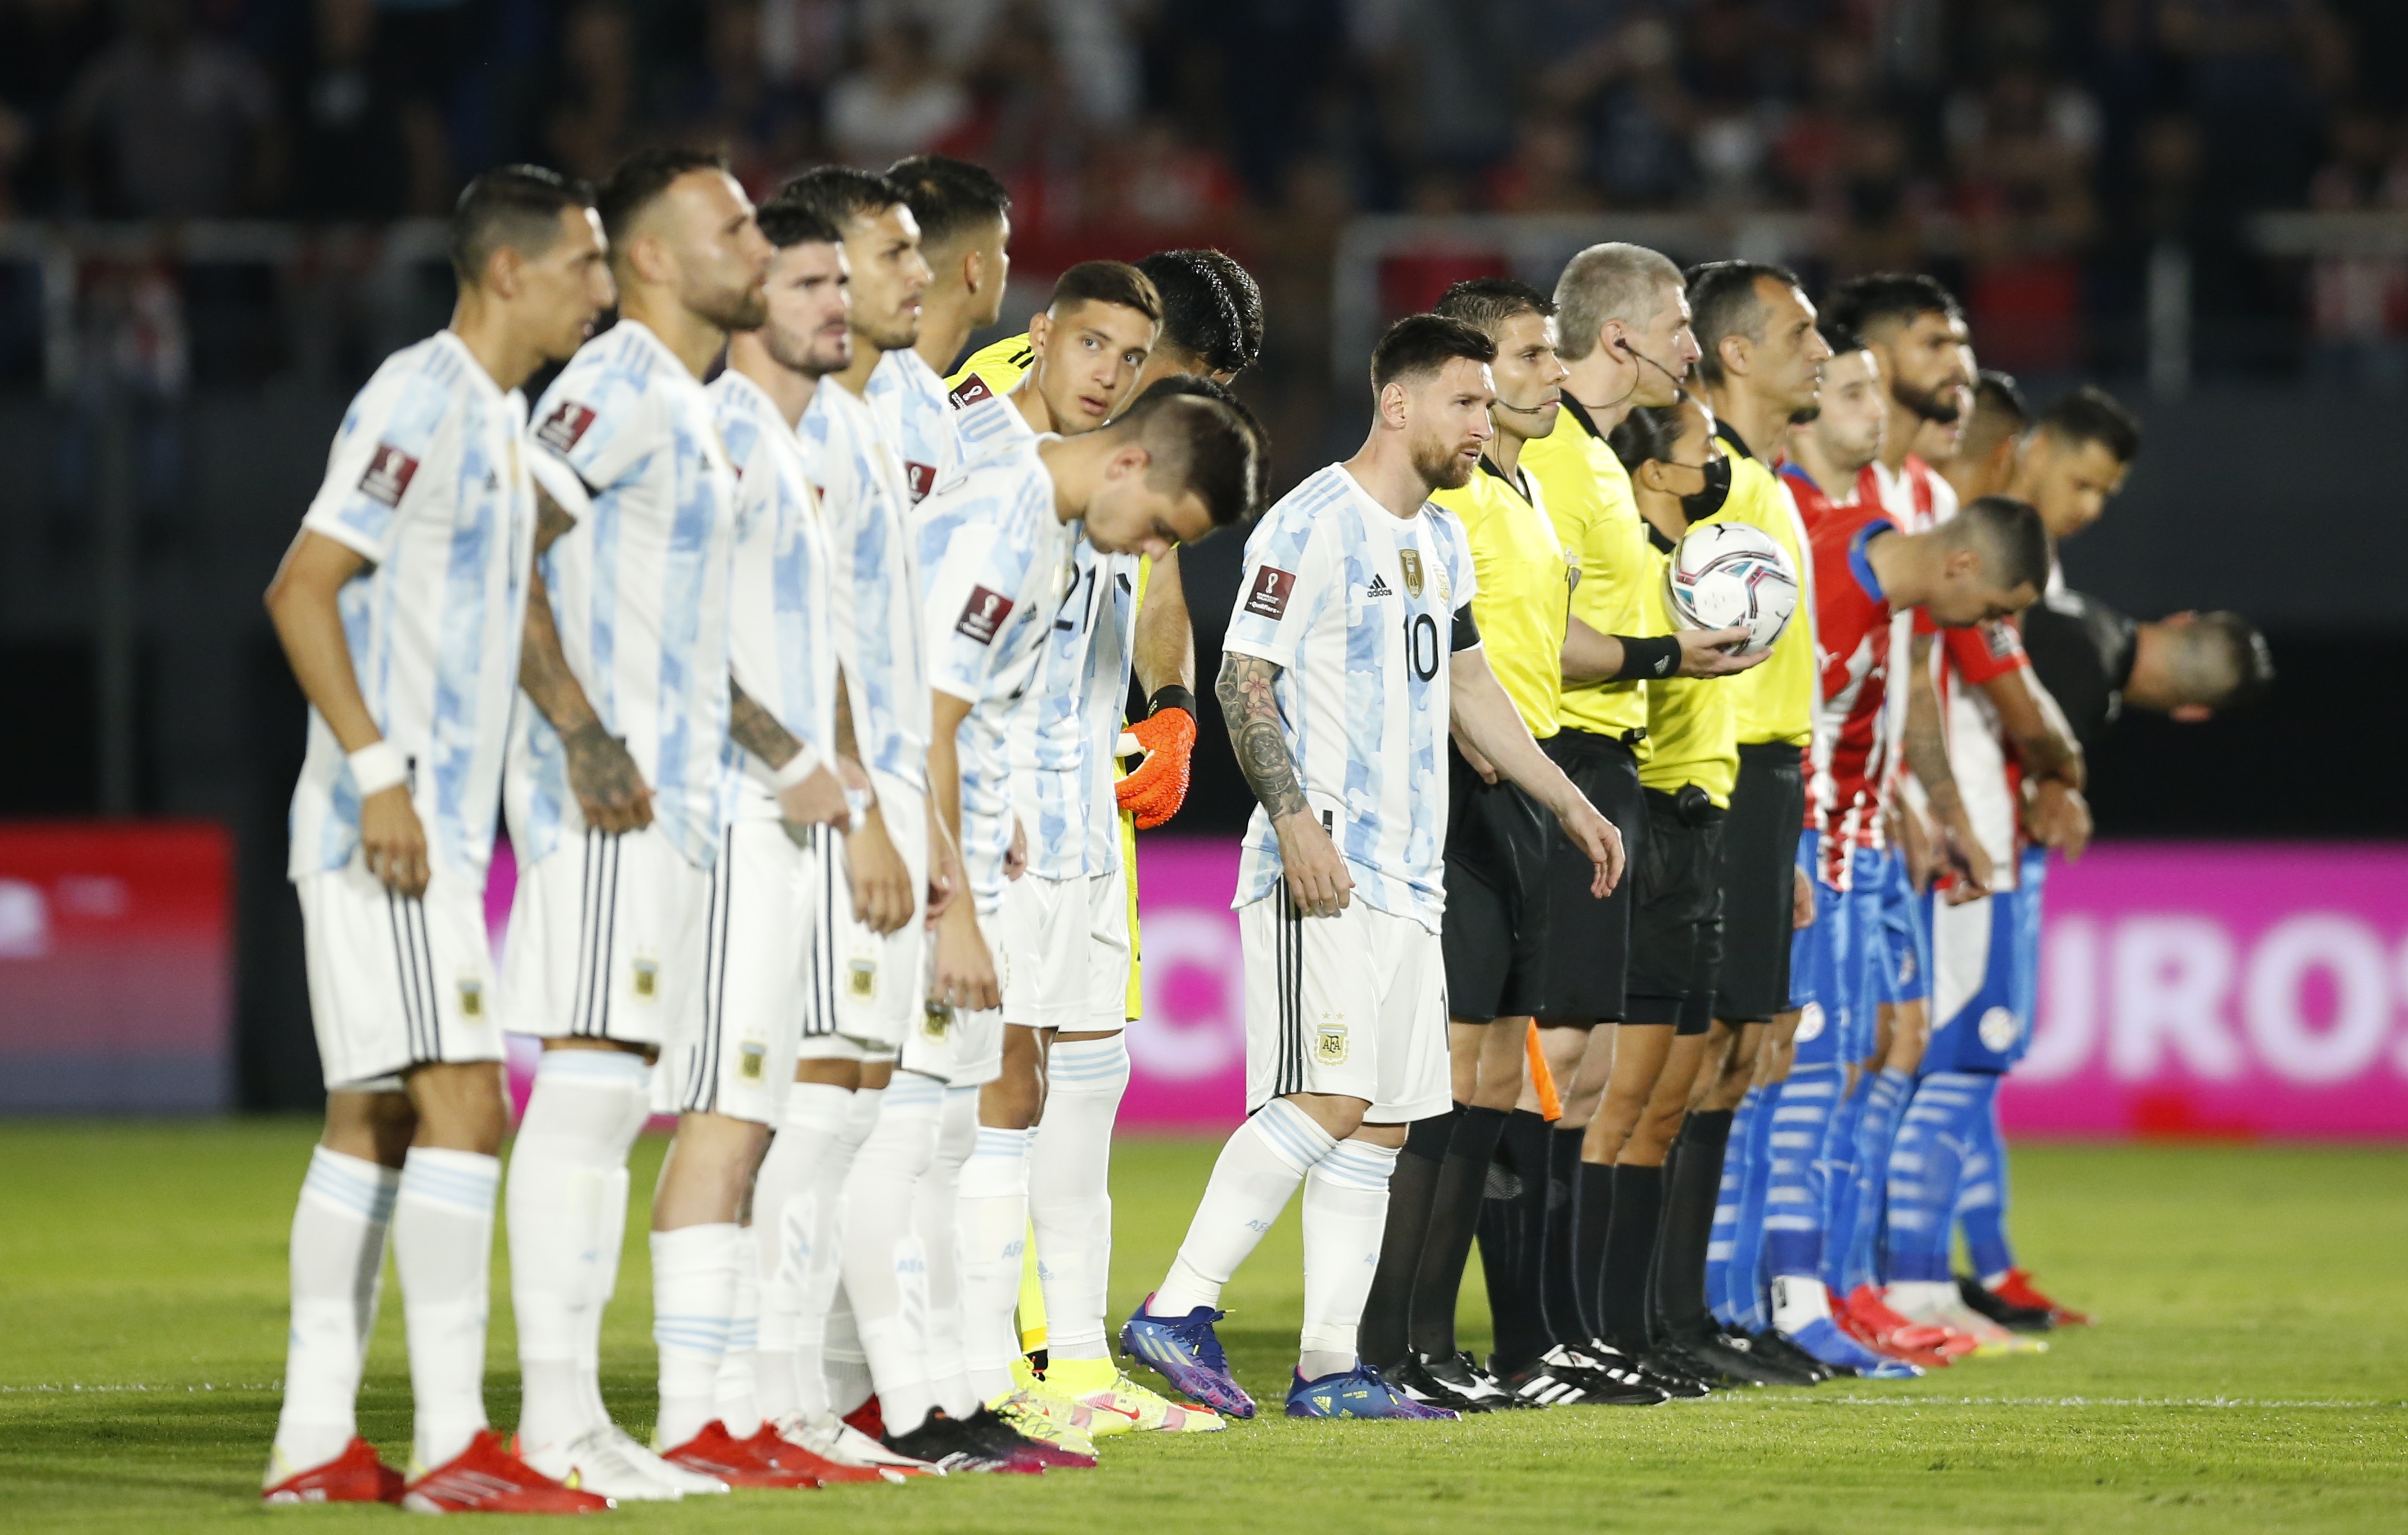 Soccer Football - World Cup - South American Qualifiers - Paraguay v Argentina - Defensores del Chaco, Asuncion, Paraguay - October 7, 2021 Players and referees lineup before the match REUTERS/Cesar Olmedo